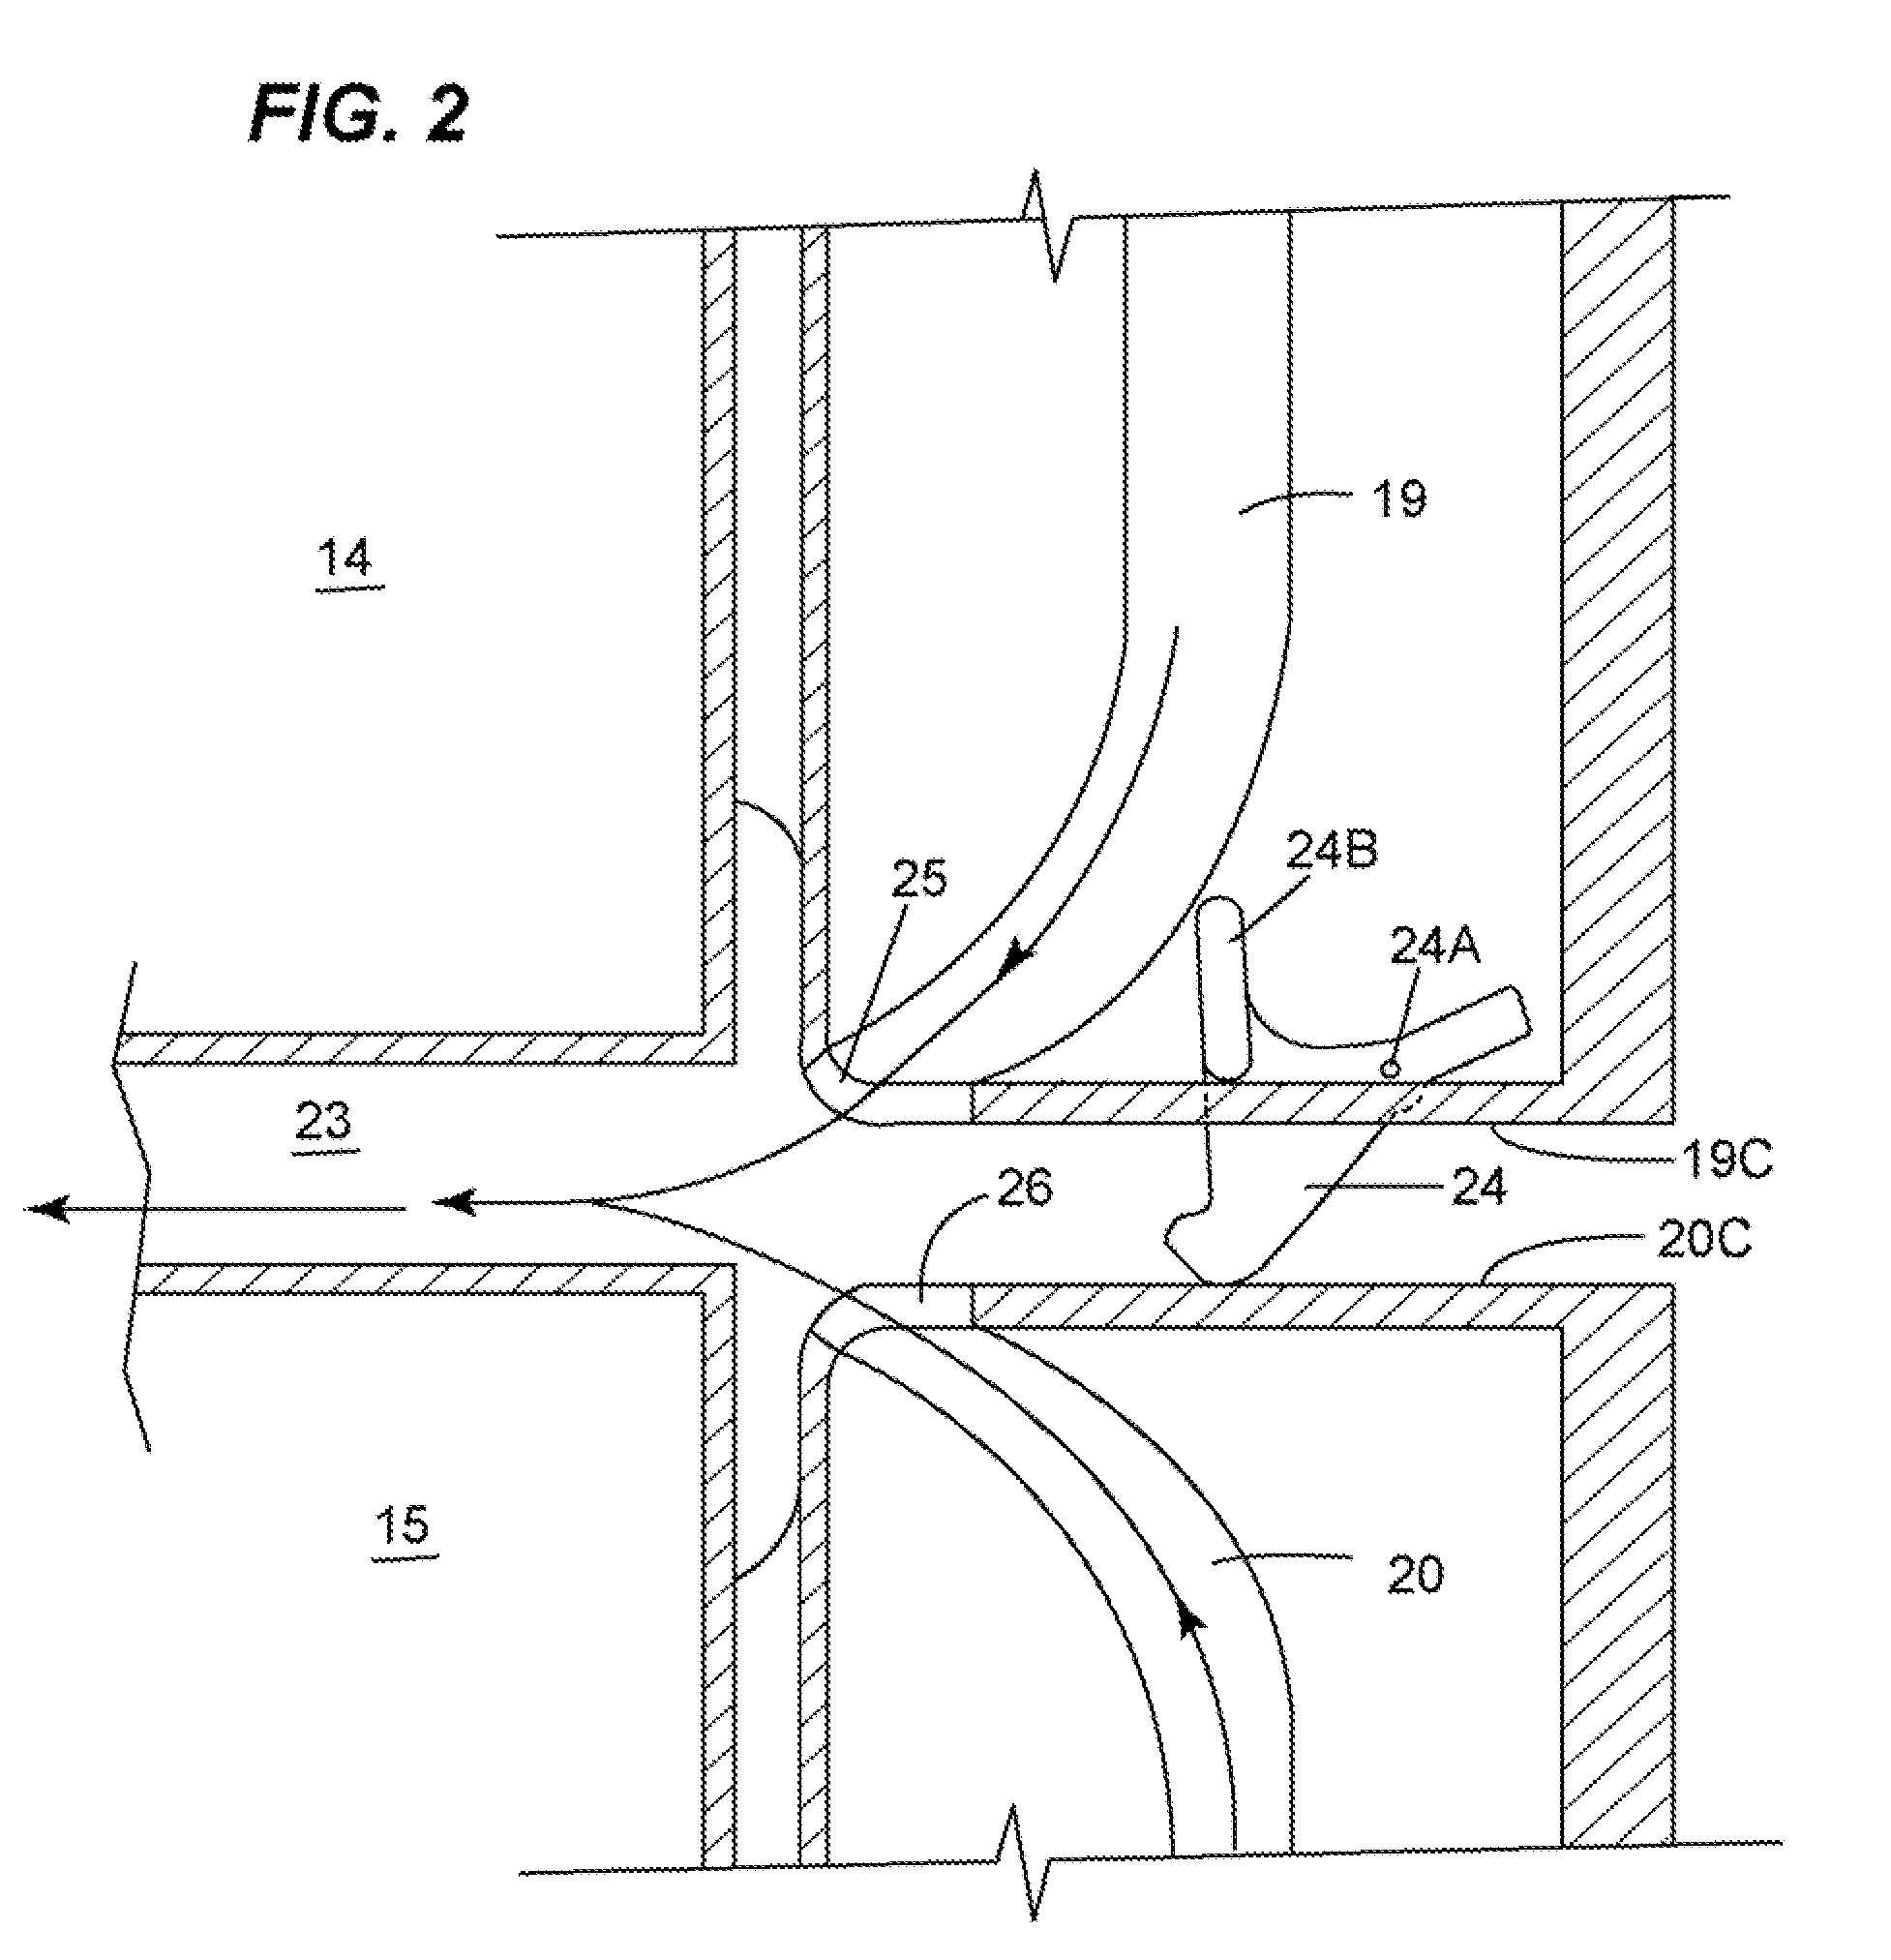 Appliance with a vacuum-based reverse airflow cooling system